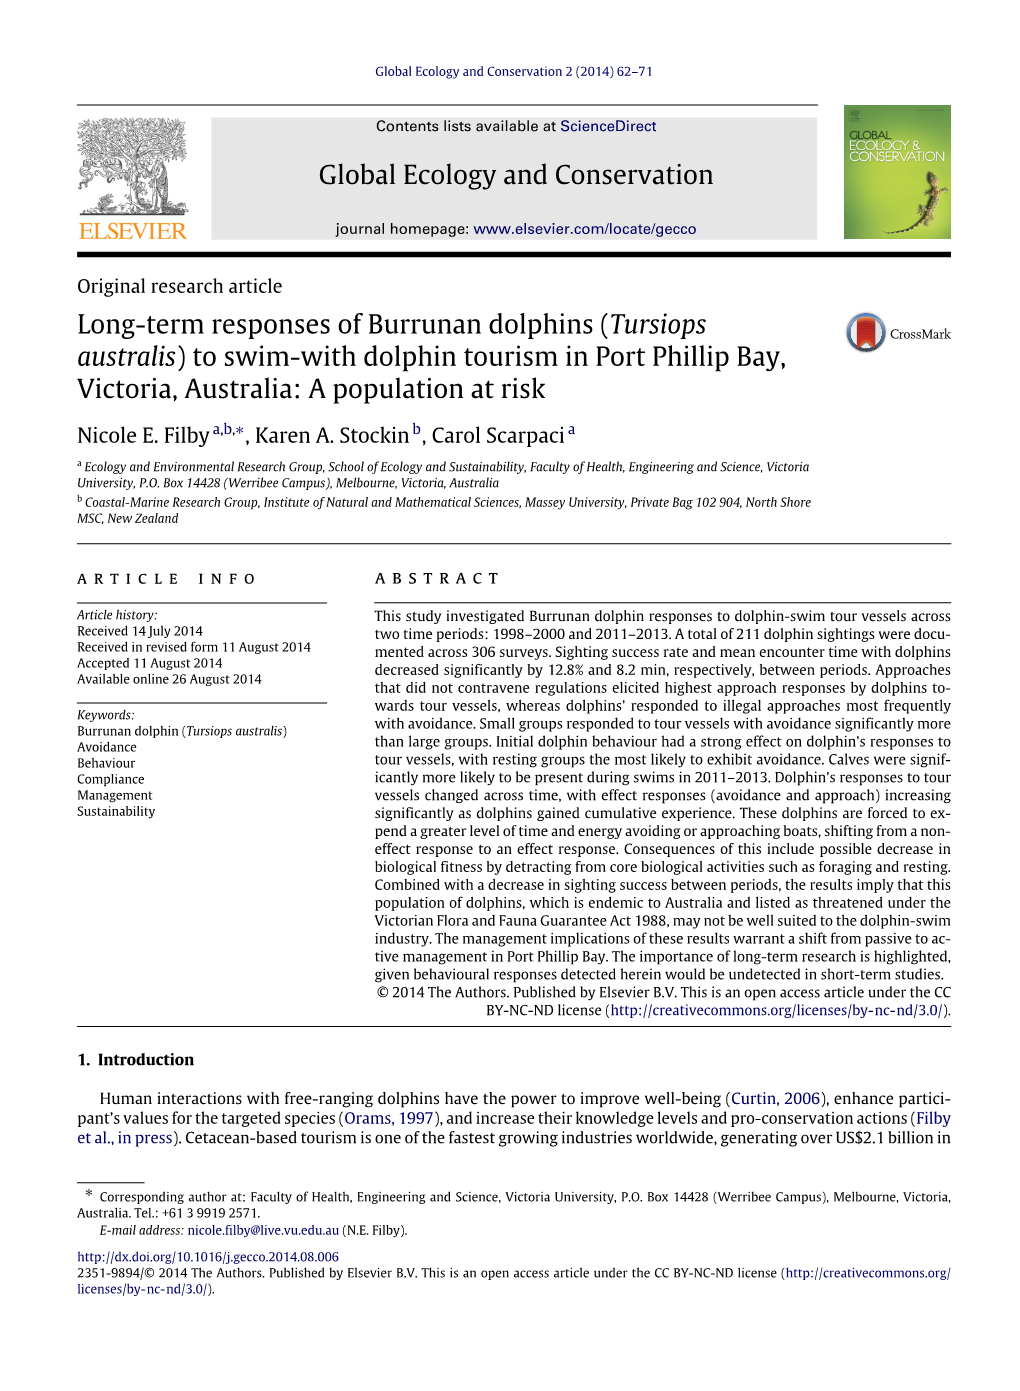 Long-Term Responses of Burrunan Dolphins (Tursiops Australis) to Swim-With Dolphin Tourism in Port Phillip Bay, Victoria, Australia: a Population at Risk